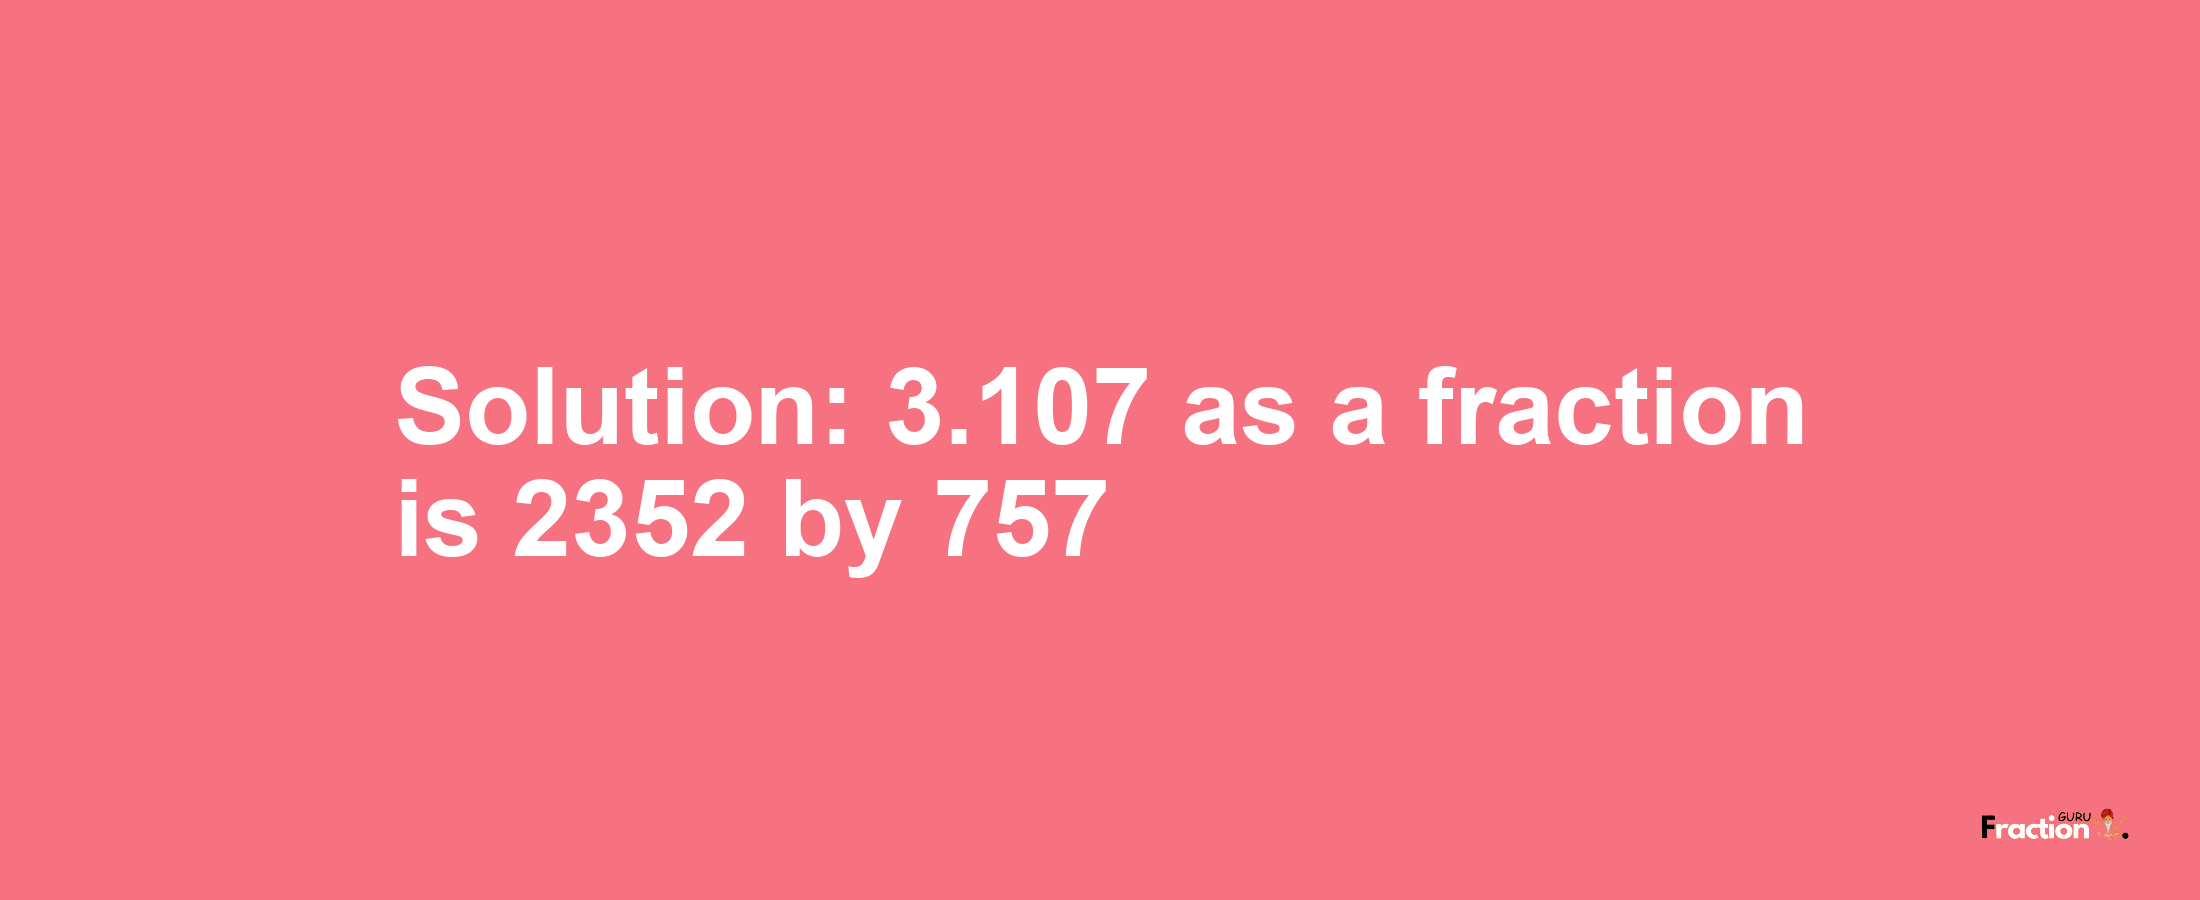 Solution:3.107 as a fraction is 2352/757